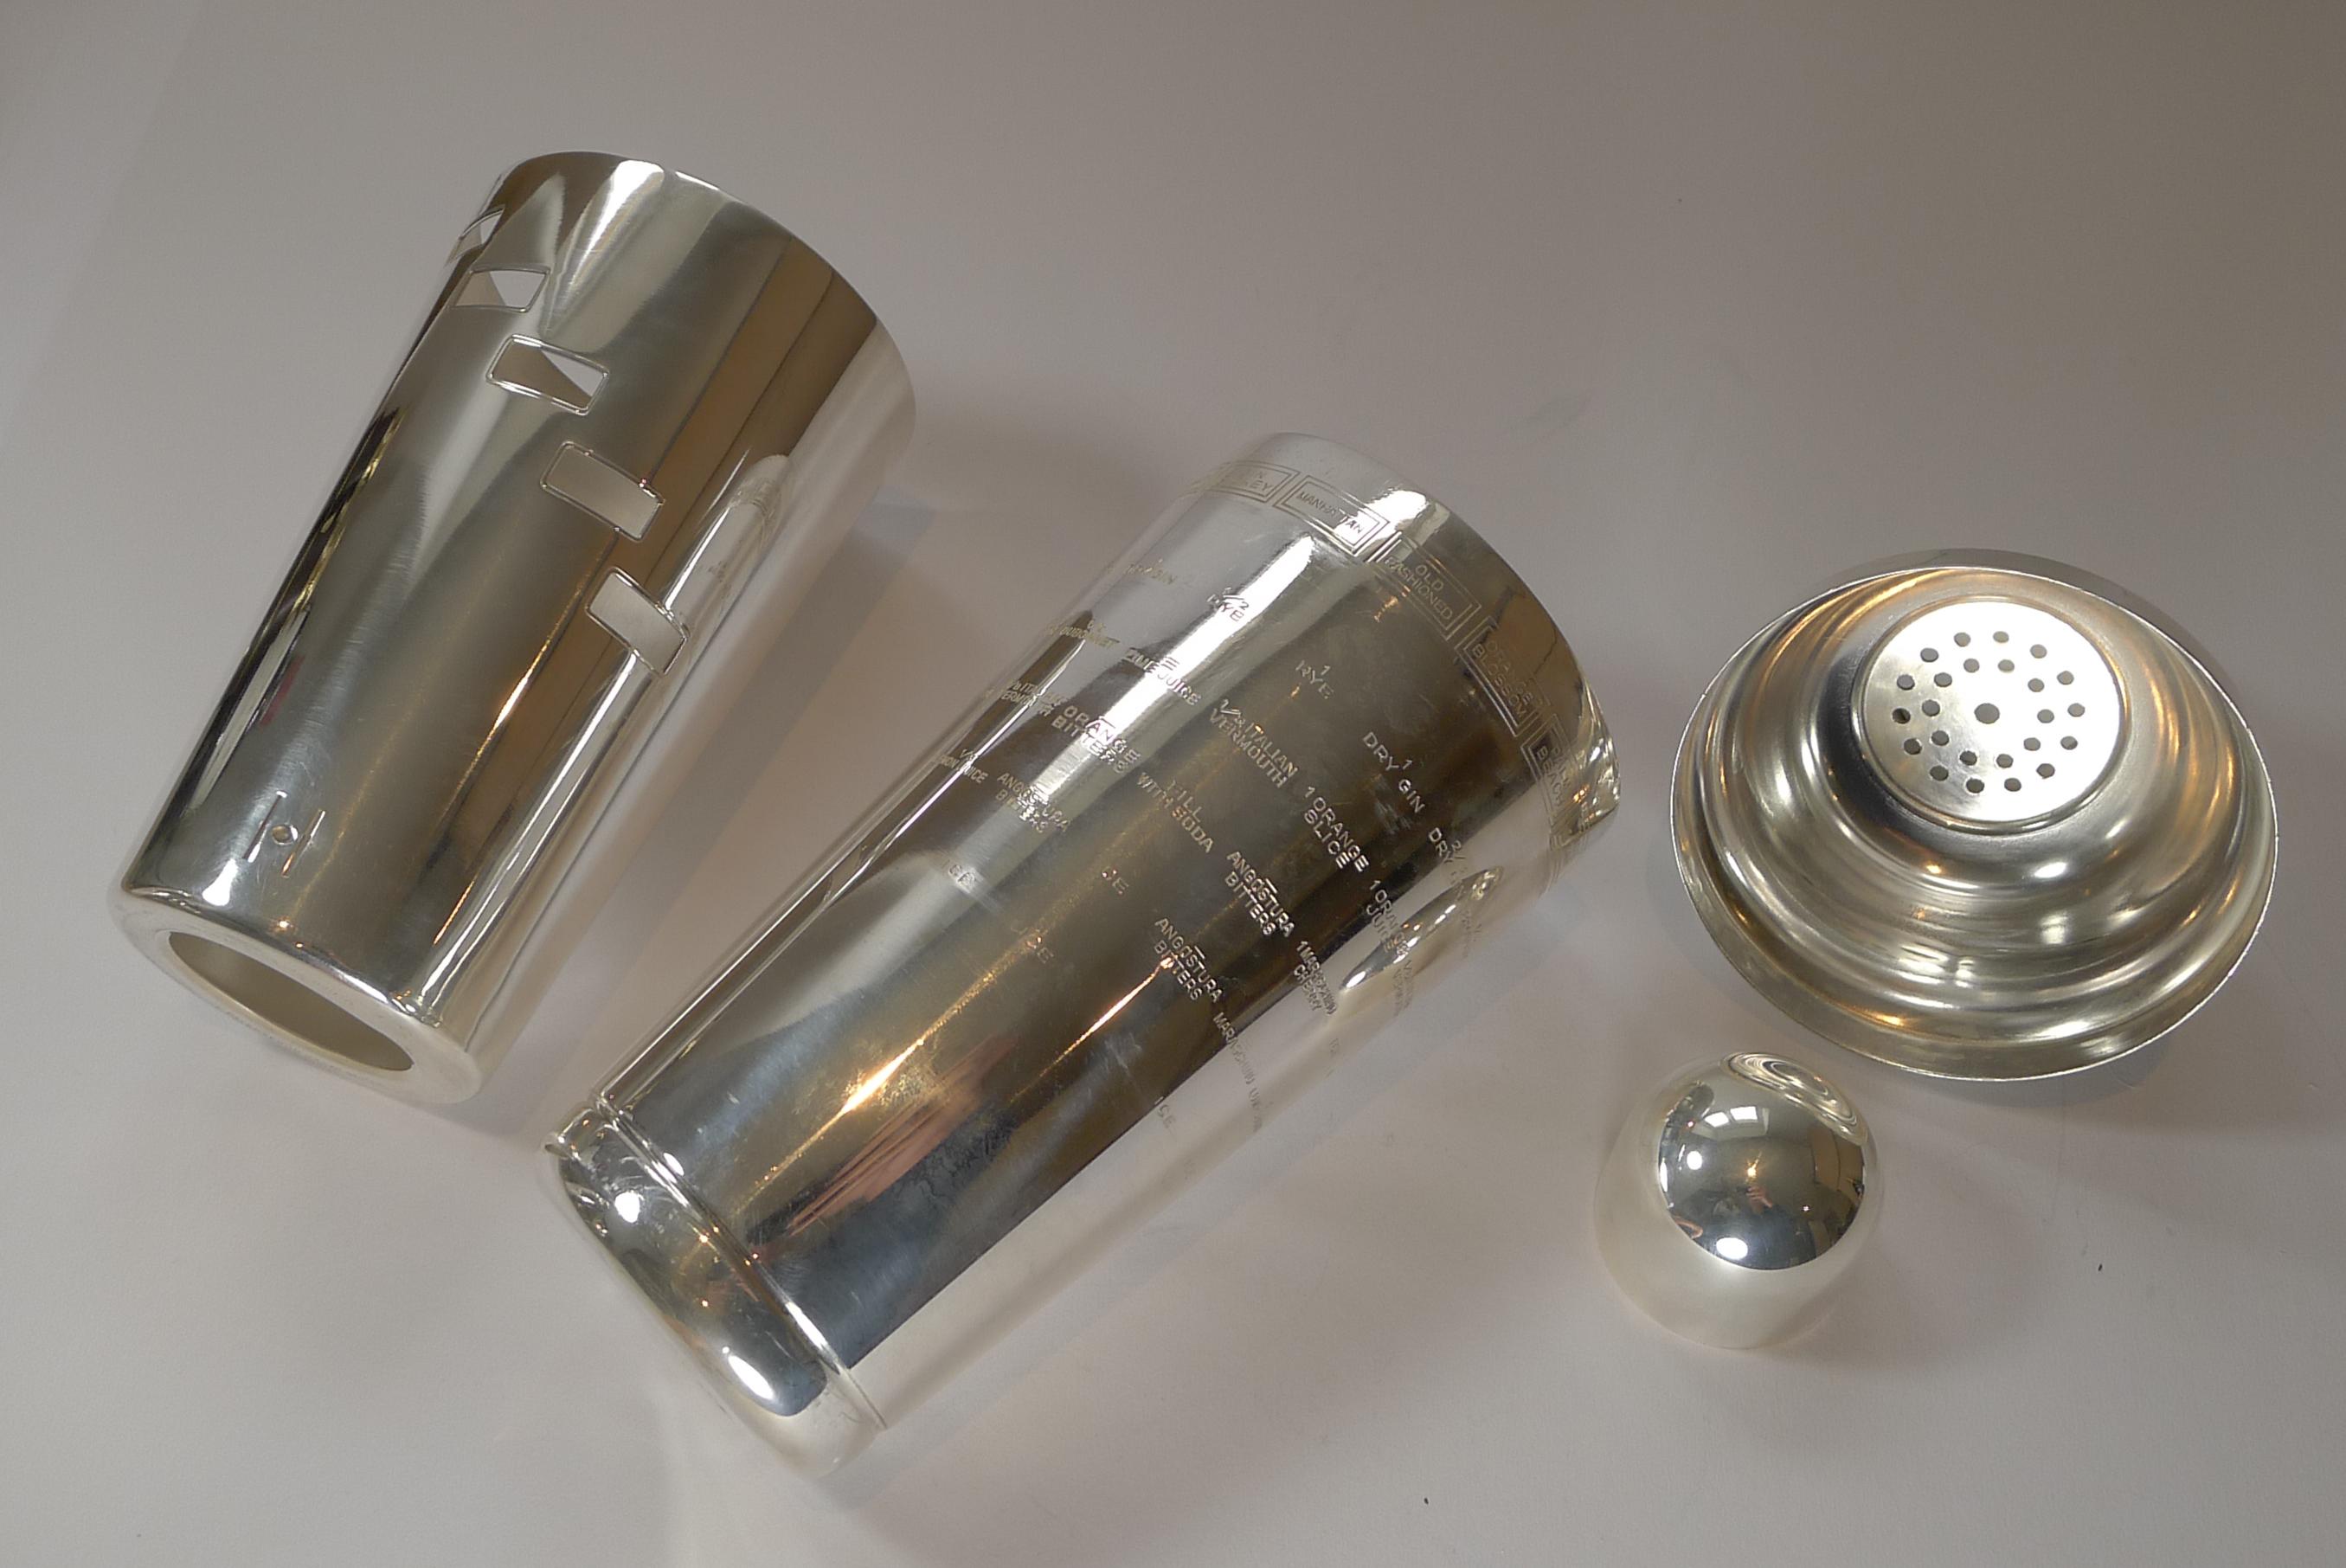 English Art Deco Silver Plated Novelty Recipe Cocktail Shaker, c.1930 8